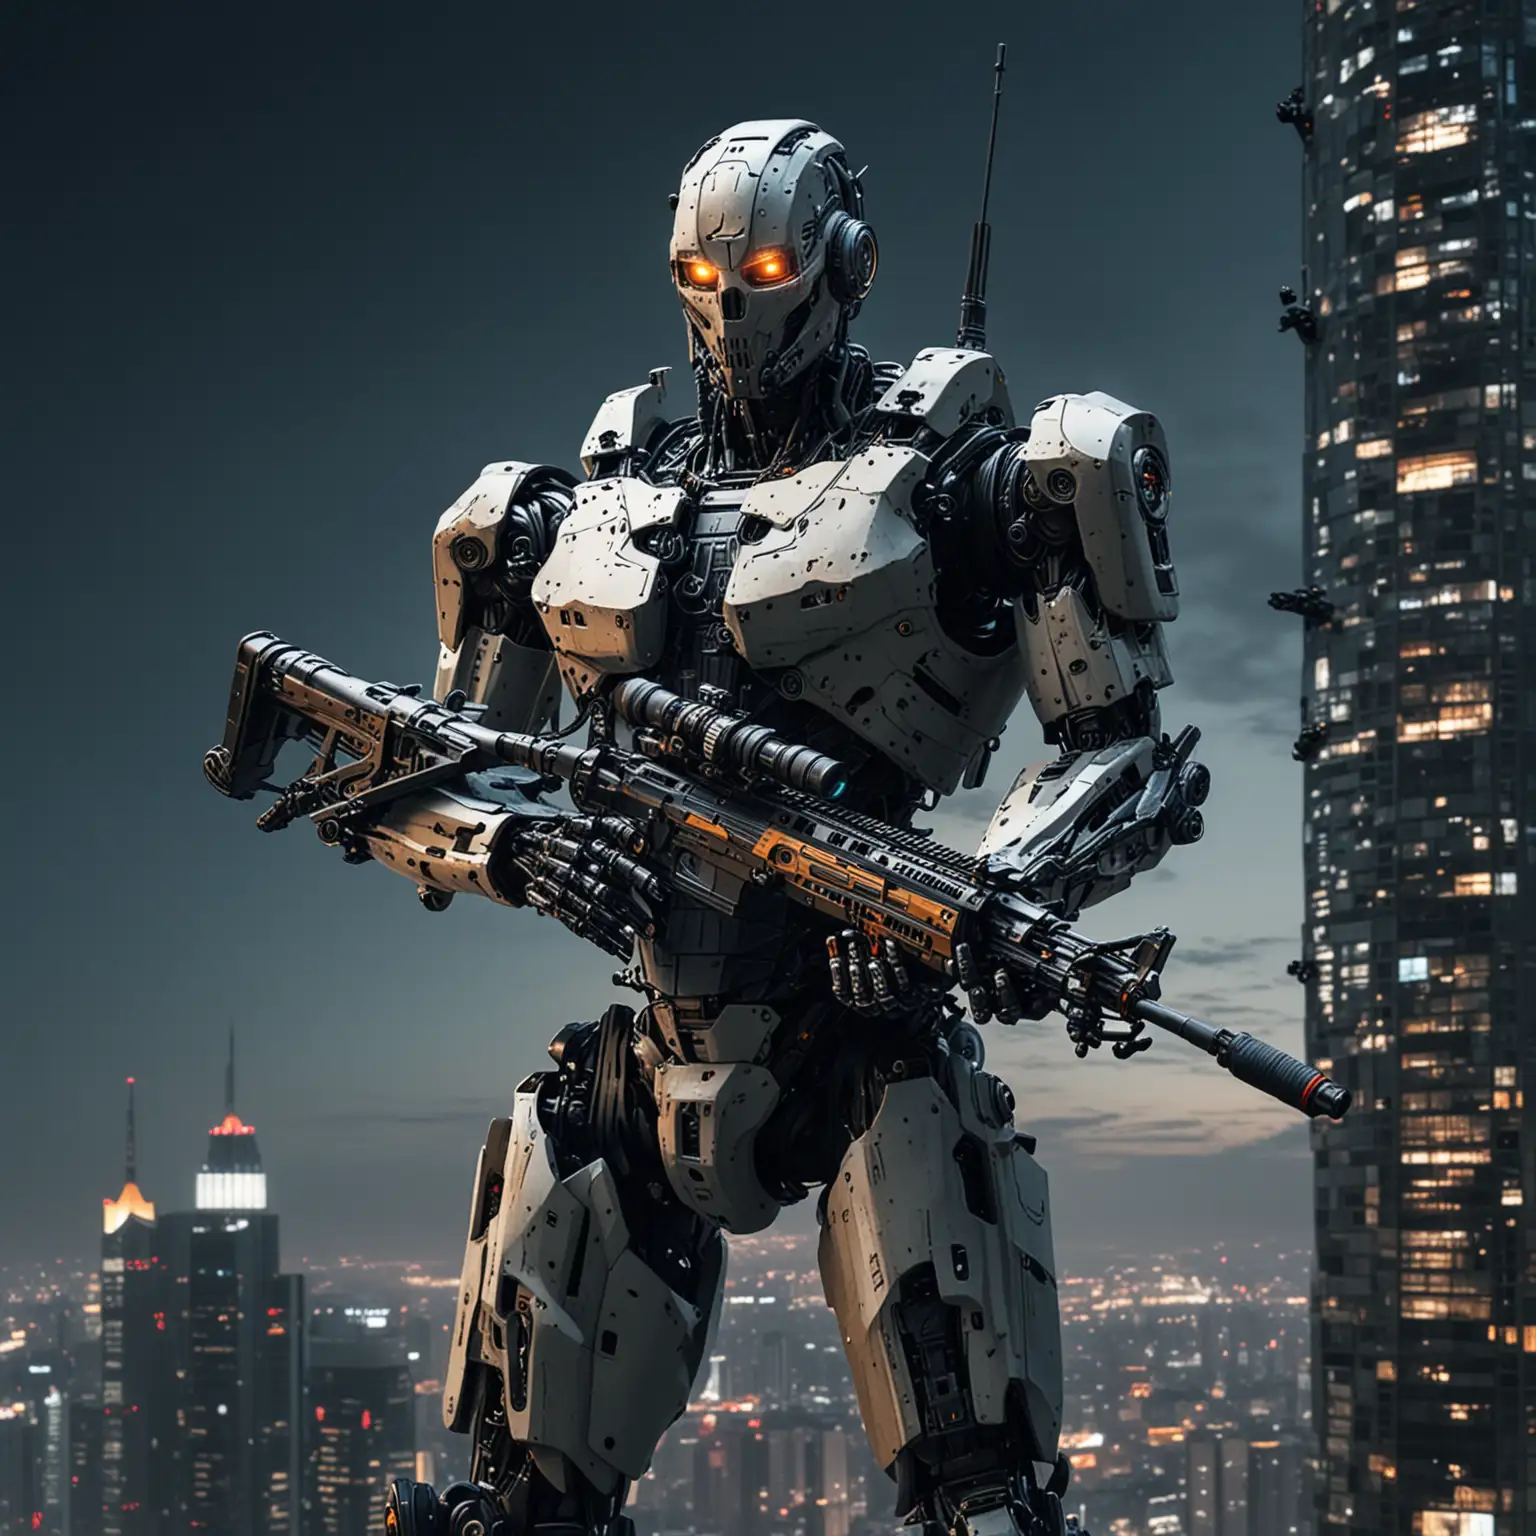 Robot Sniper Guarding Night City with Drone Swarm